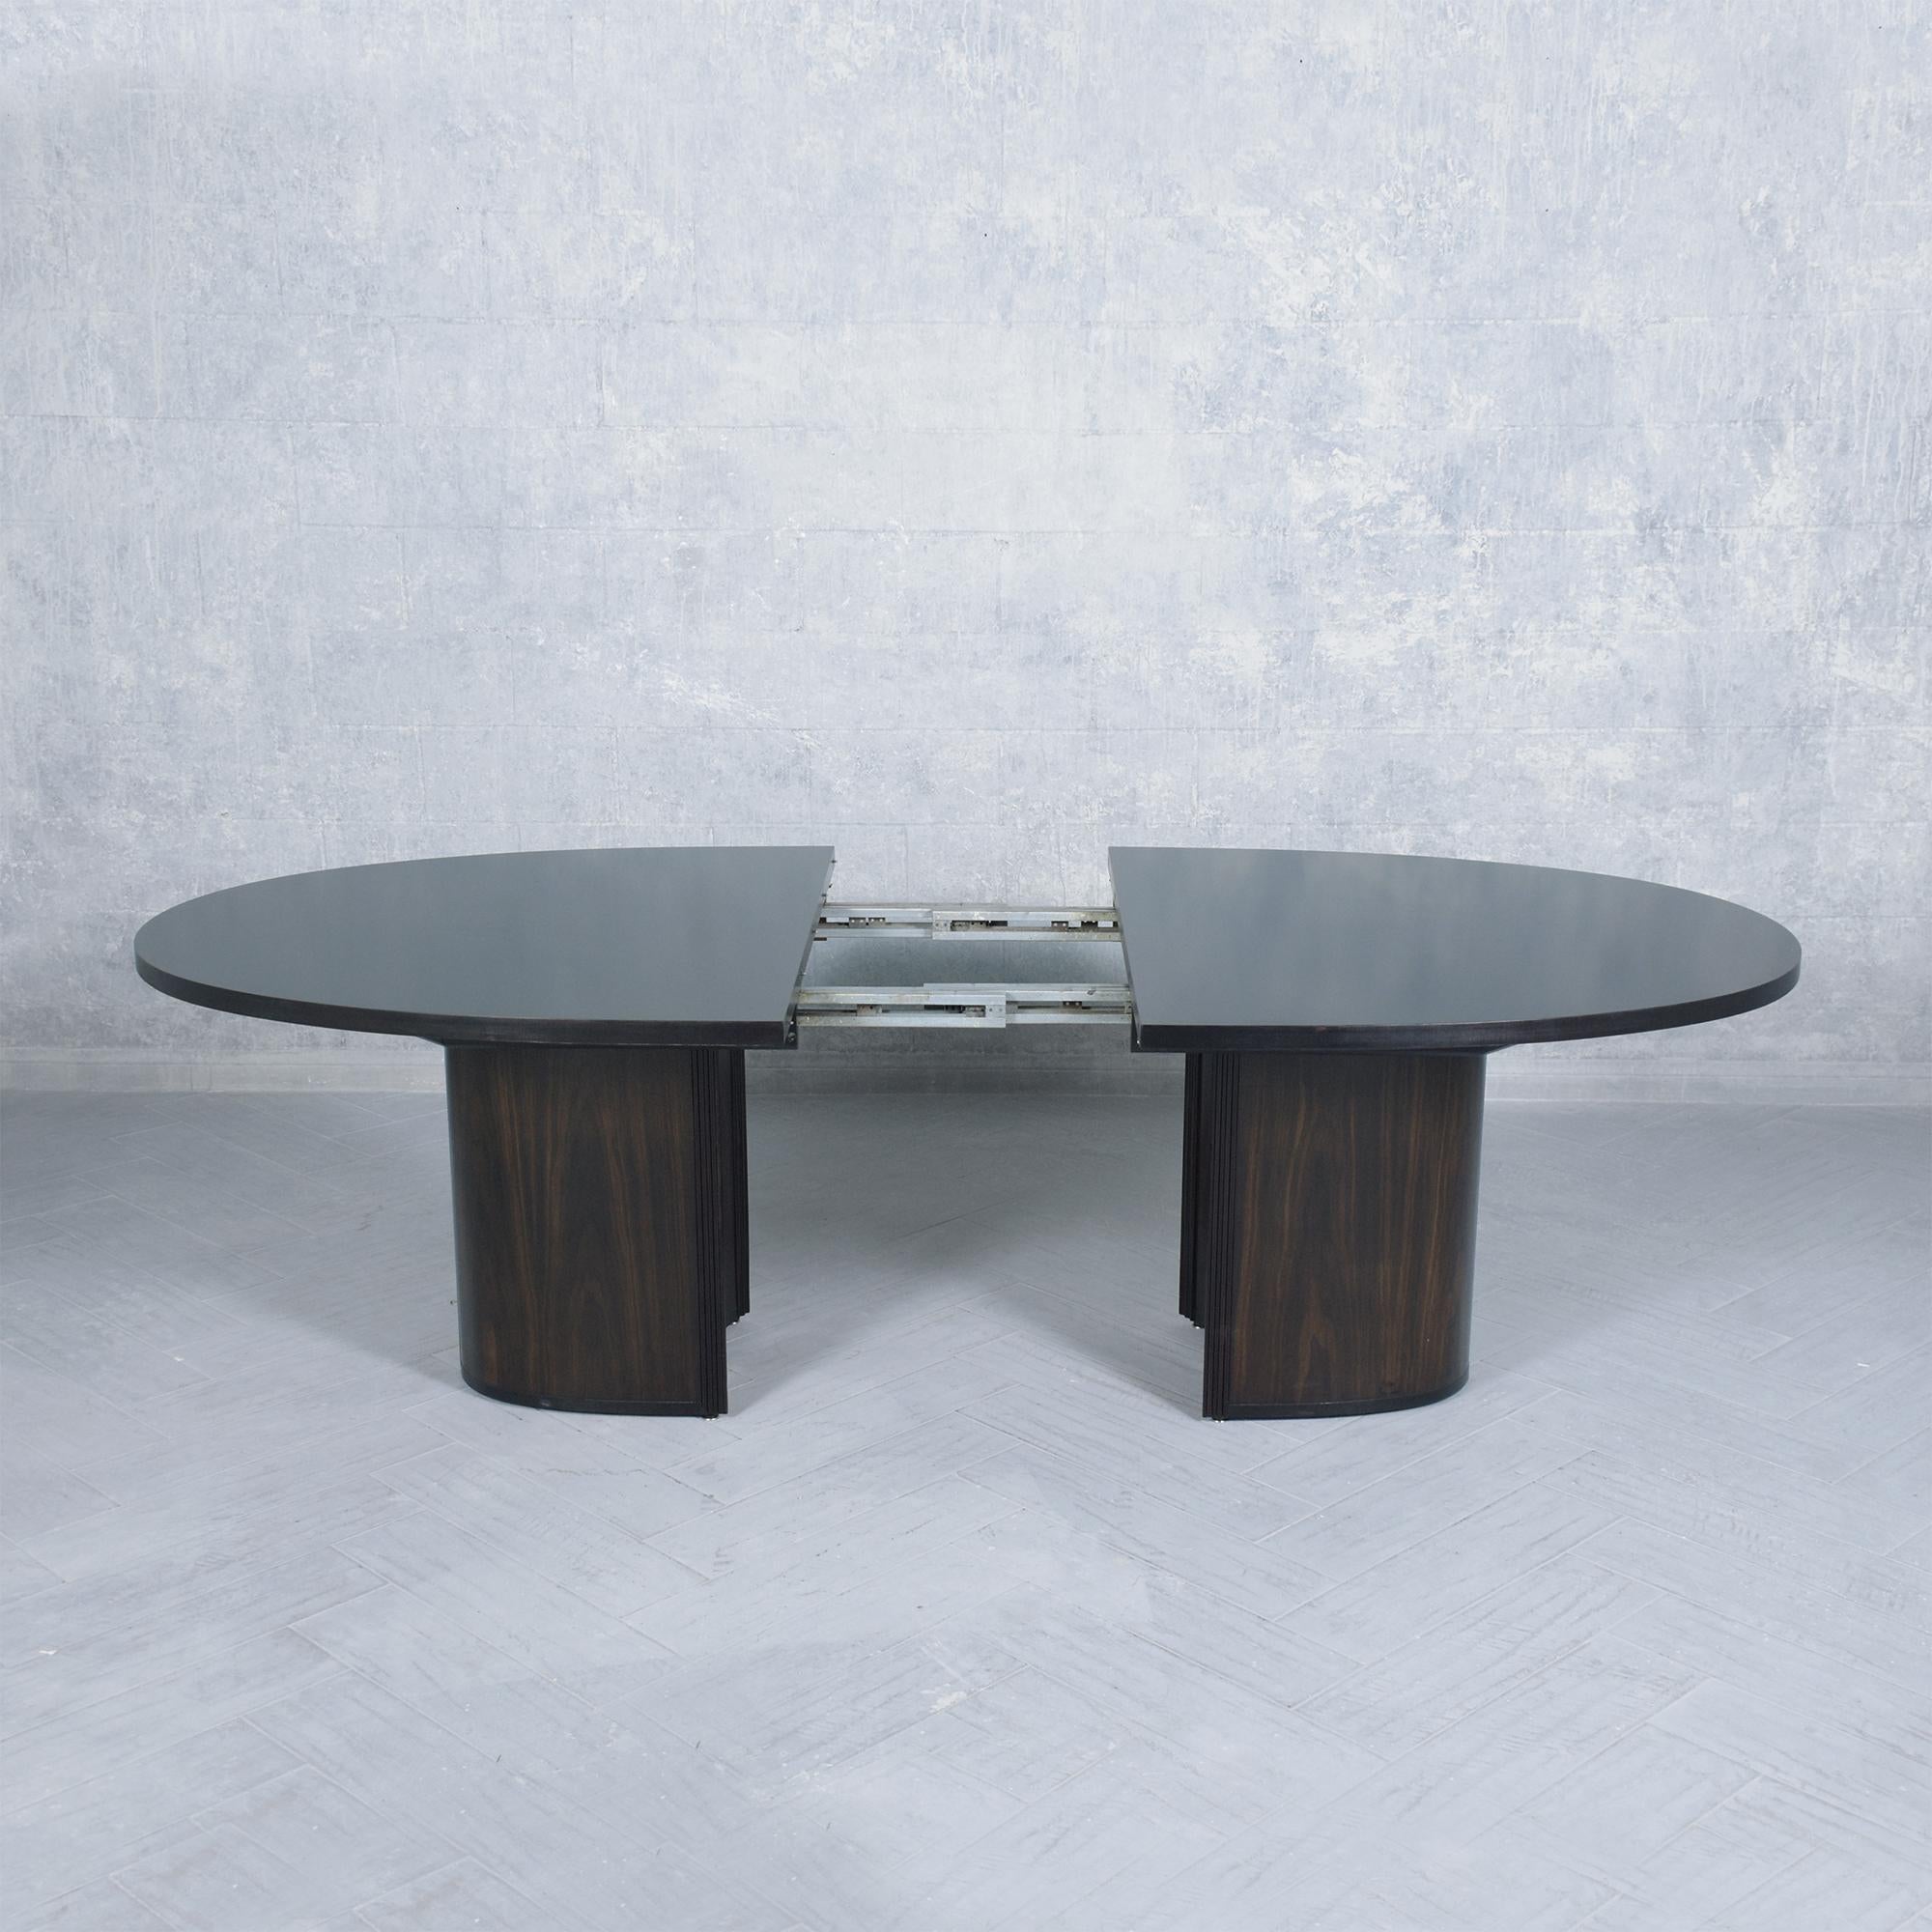 American Mid-Century Modern Extendable Dining Table